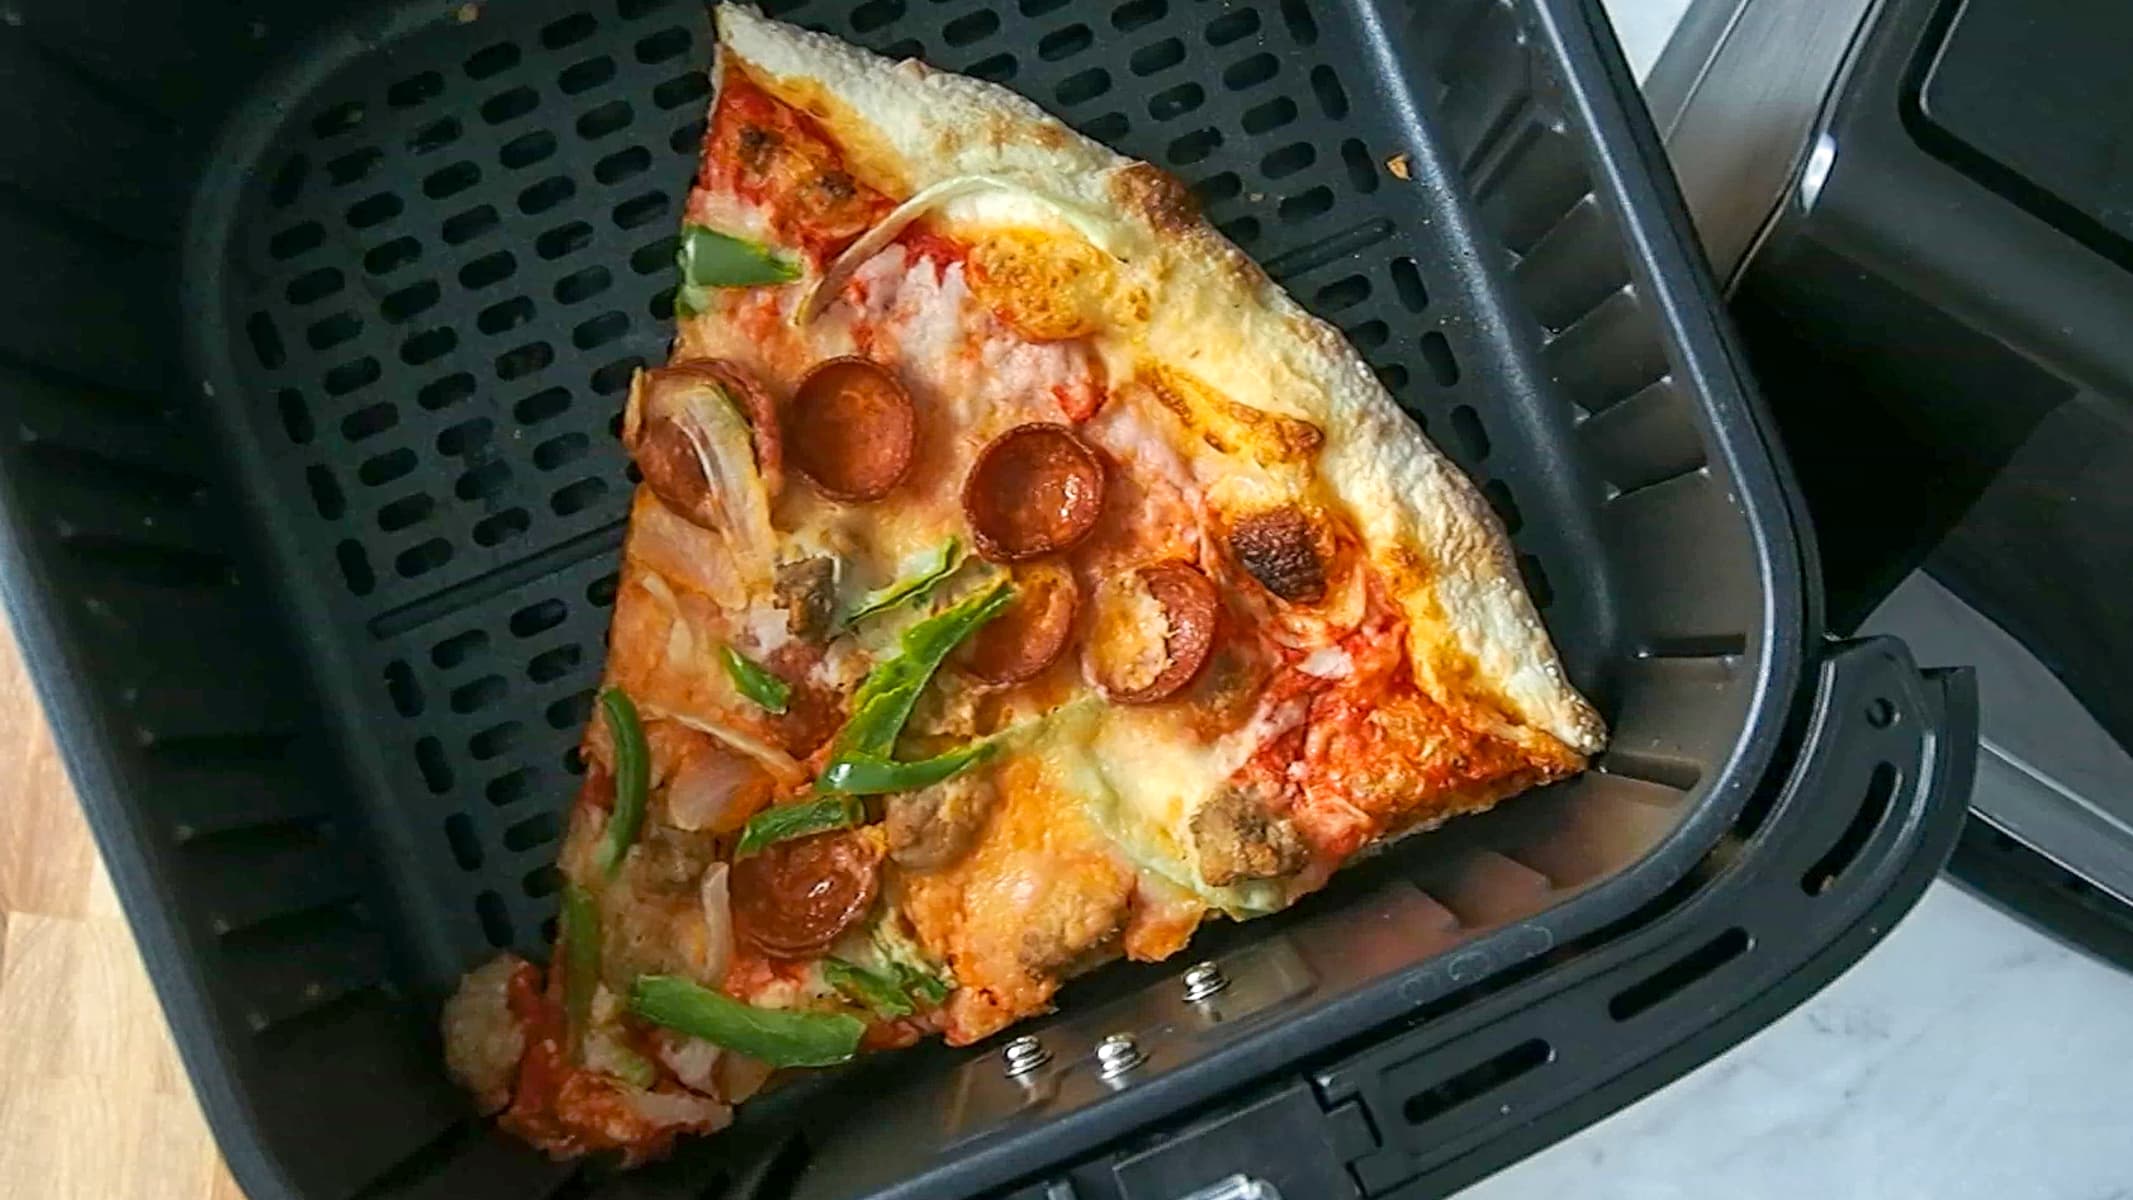 How to Reheat Pizza in Air Fryer? - Also The Crumbs Please